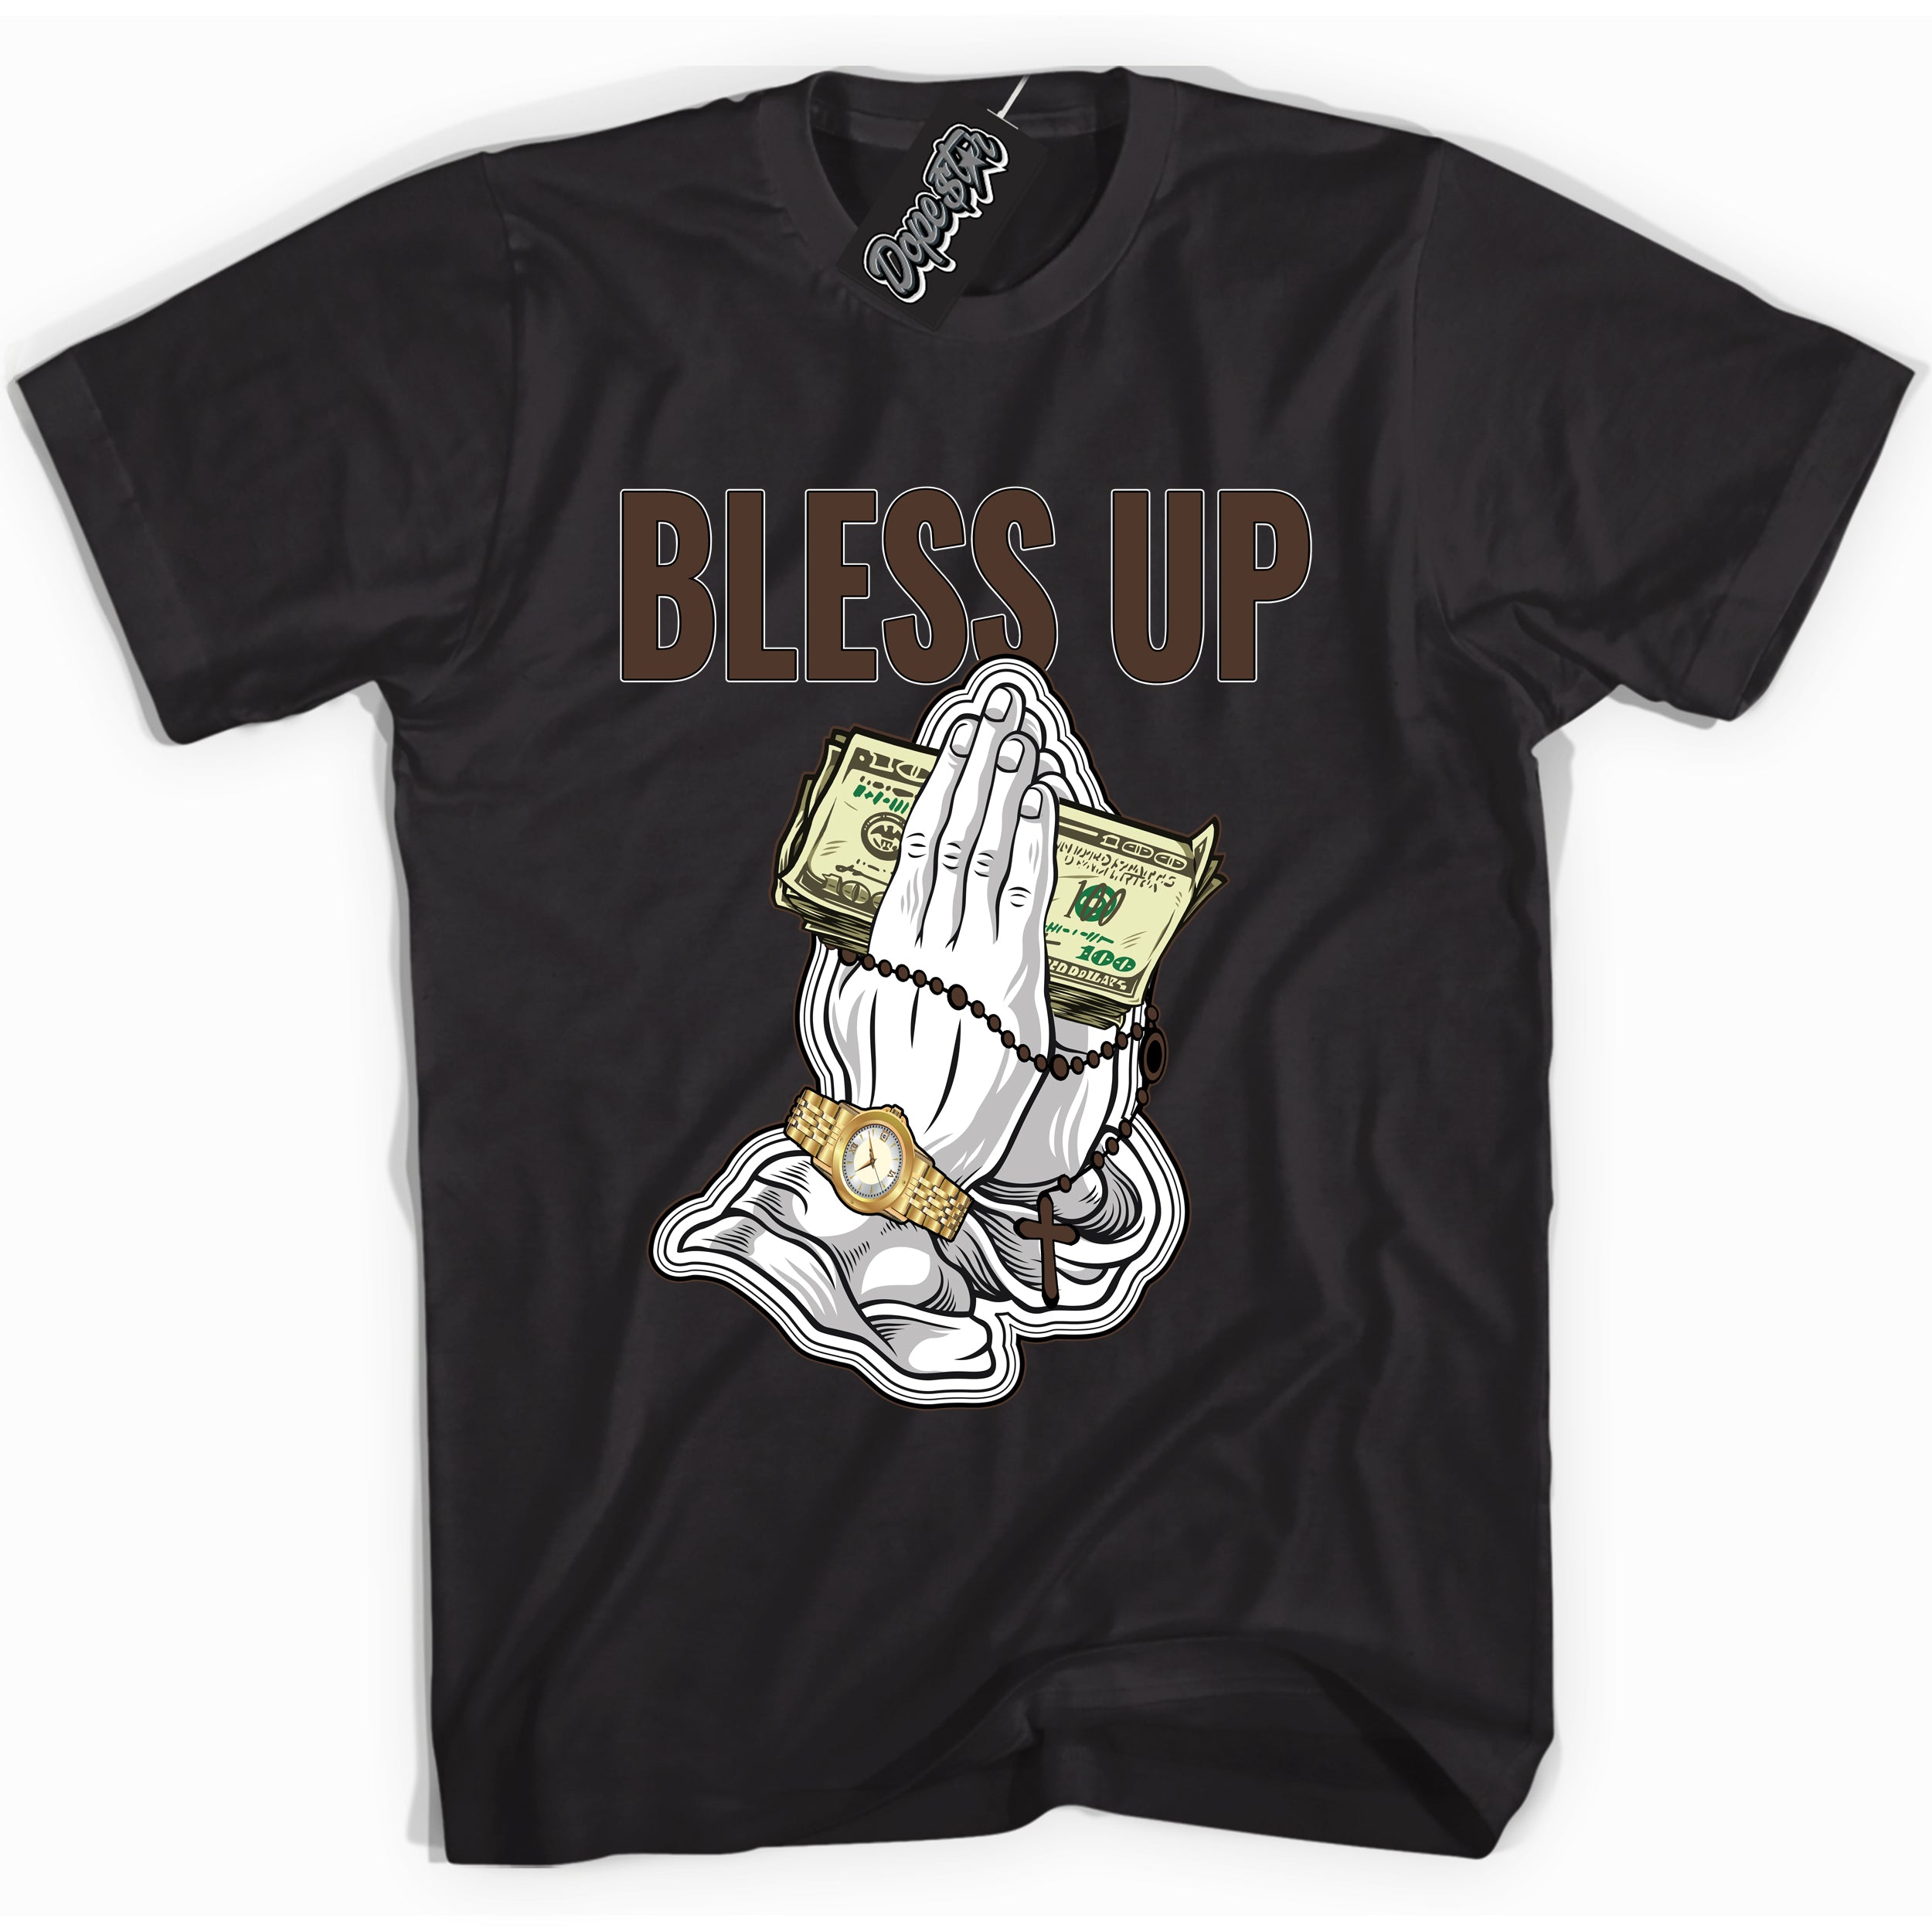 Cool Black graphic tee with “ Bless Up ” design, that perfectly matches Palomino 1s sneakers 